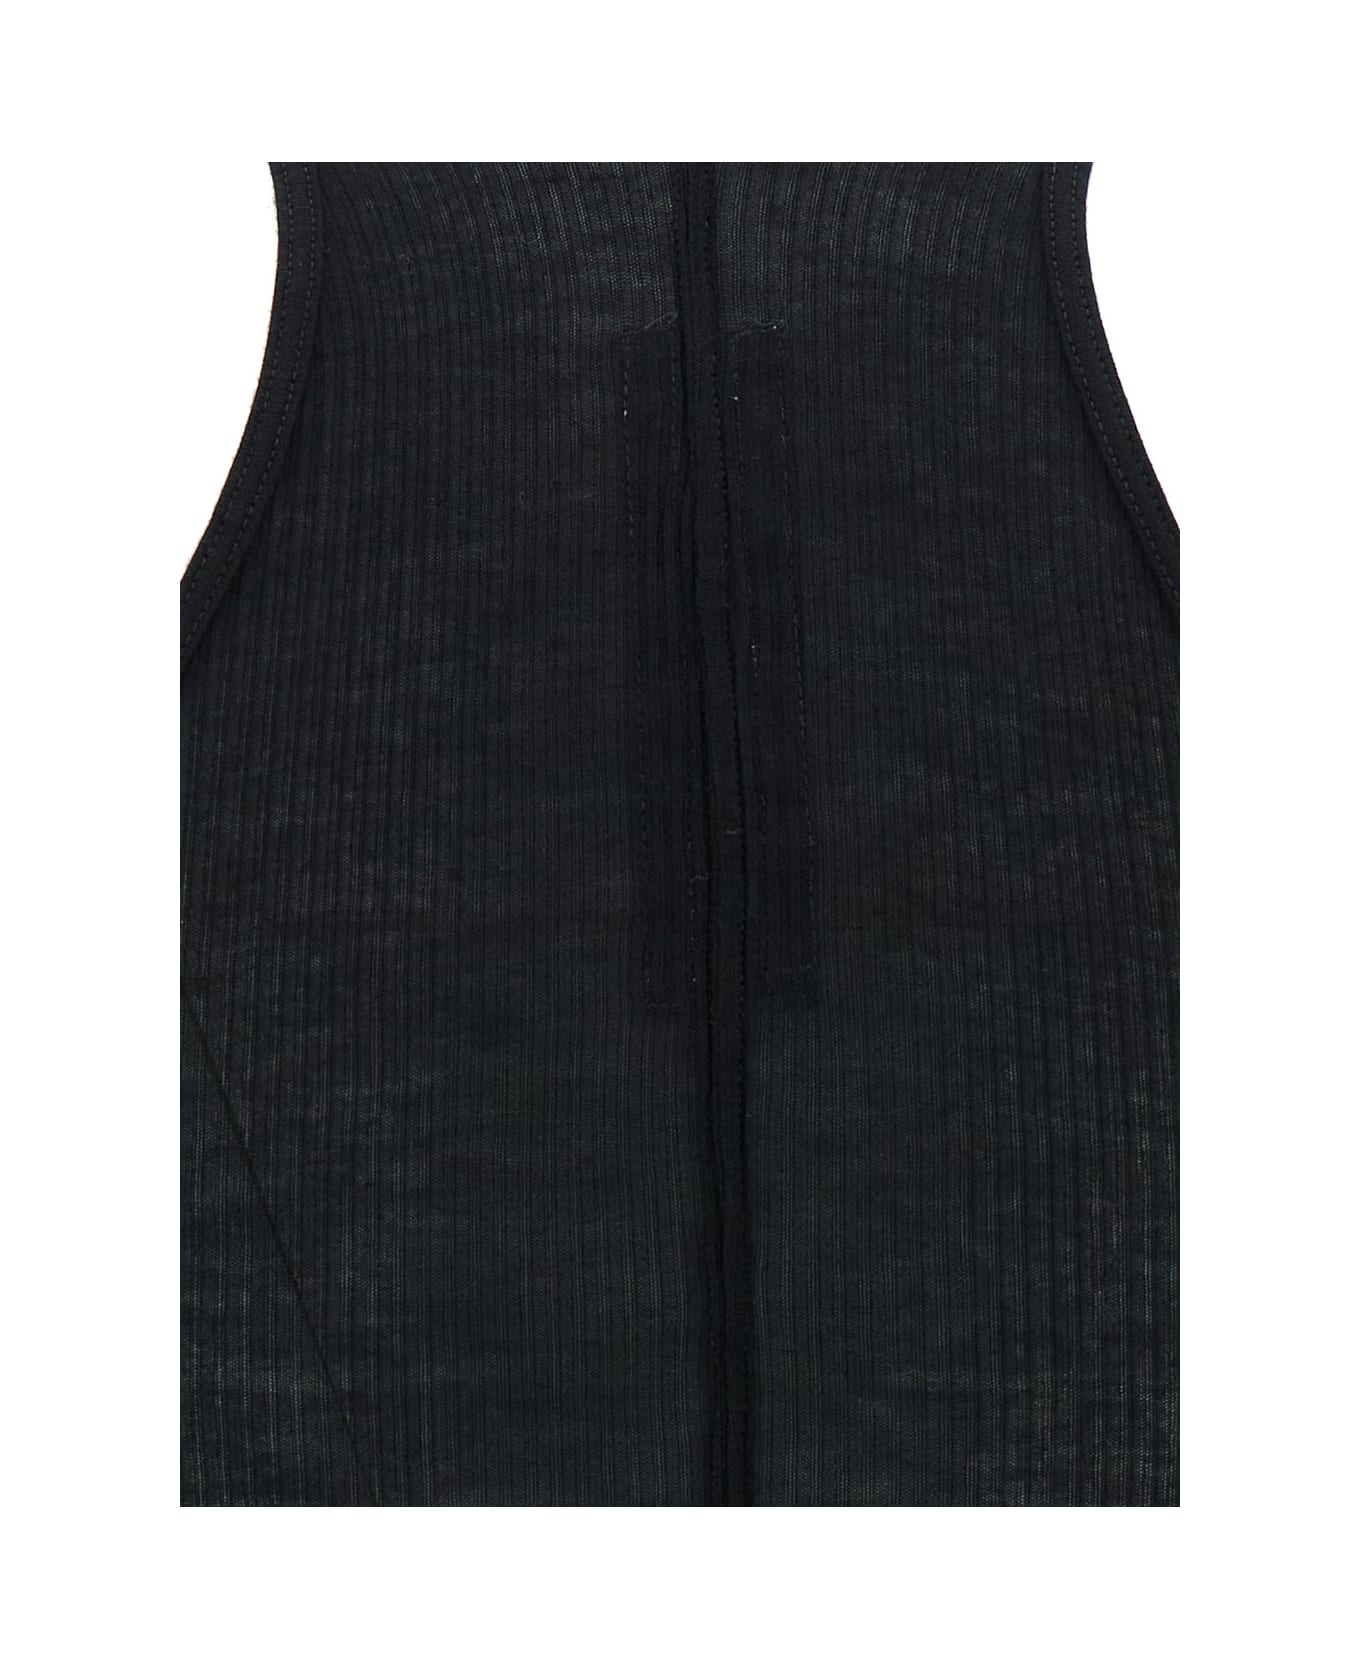 Rick Owens Black Ribbed Tank Top With Curved Hem In Viscose And Silk Blend Woman - BLACK タンクトップ